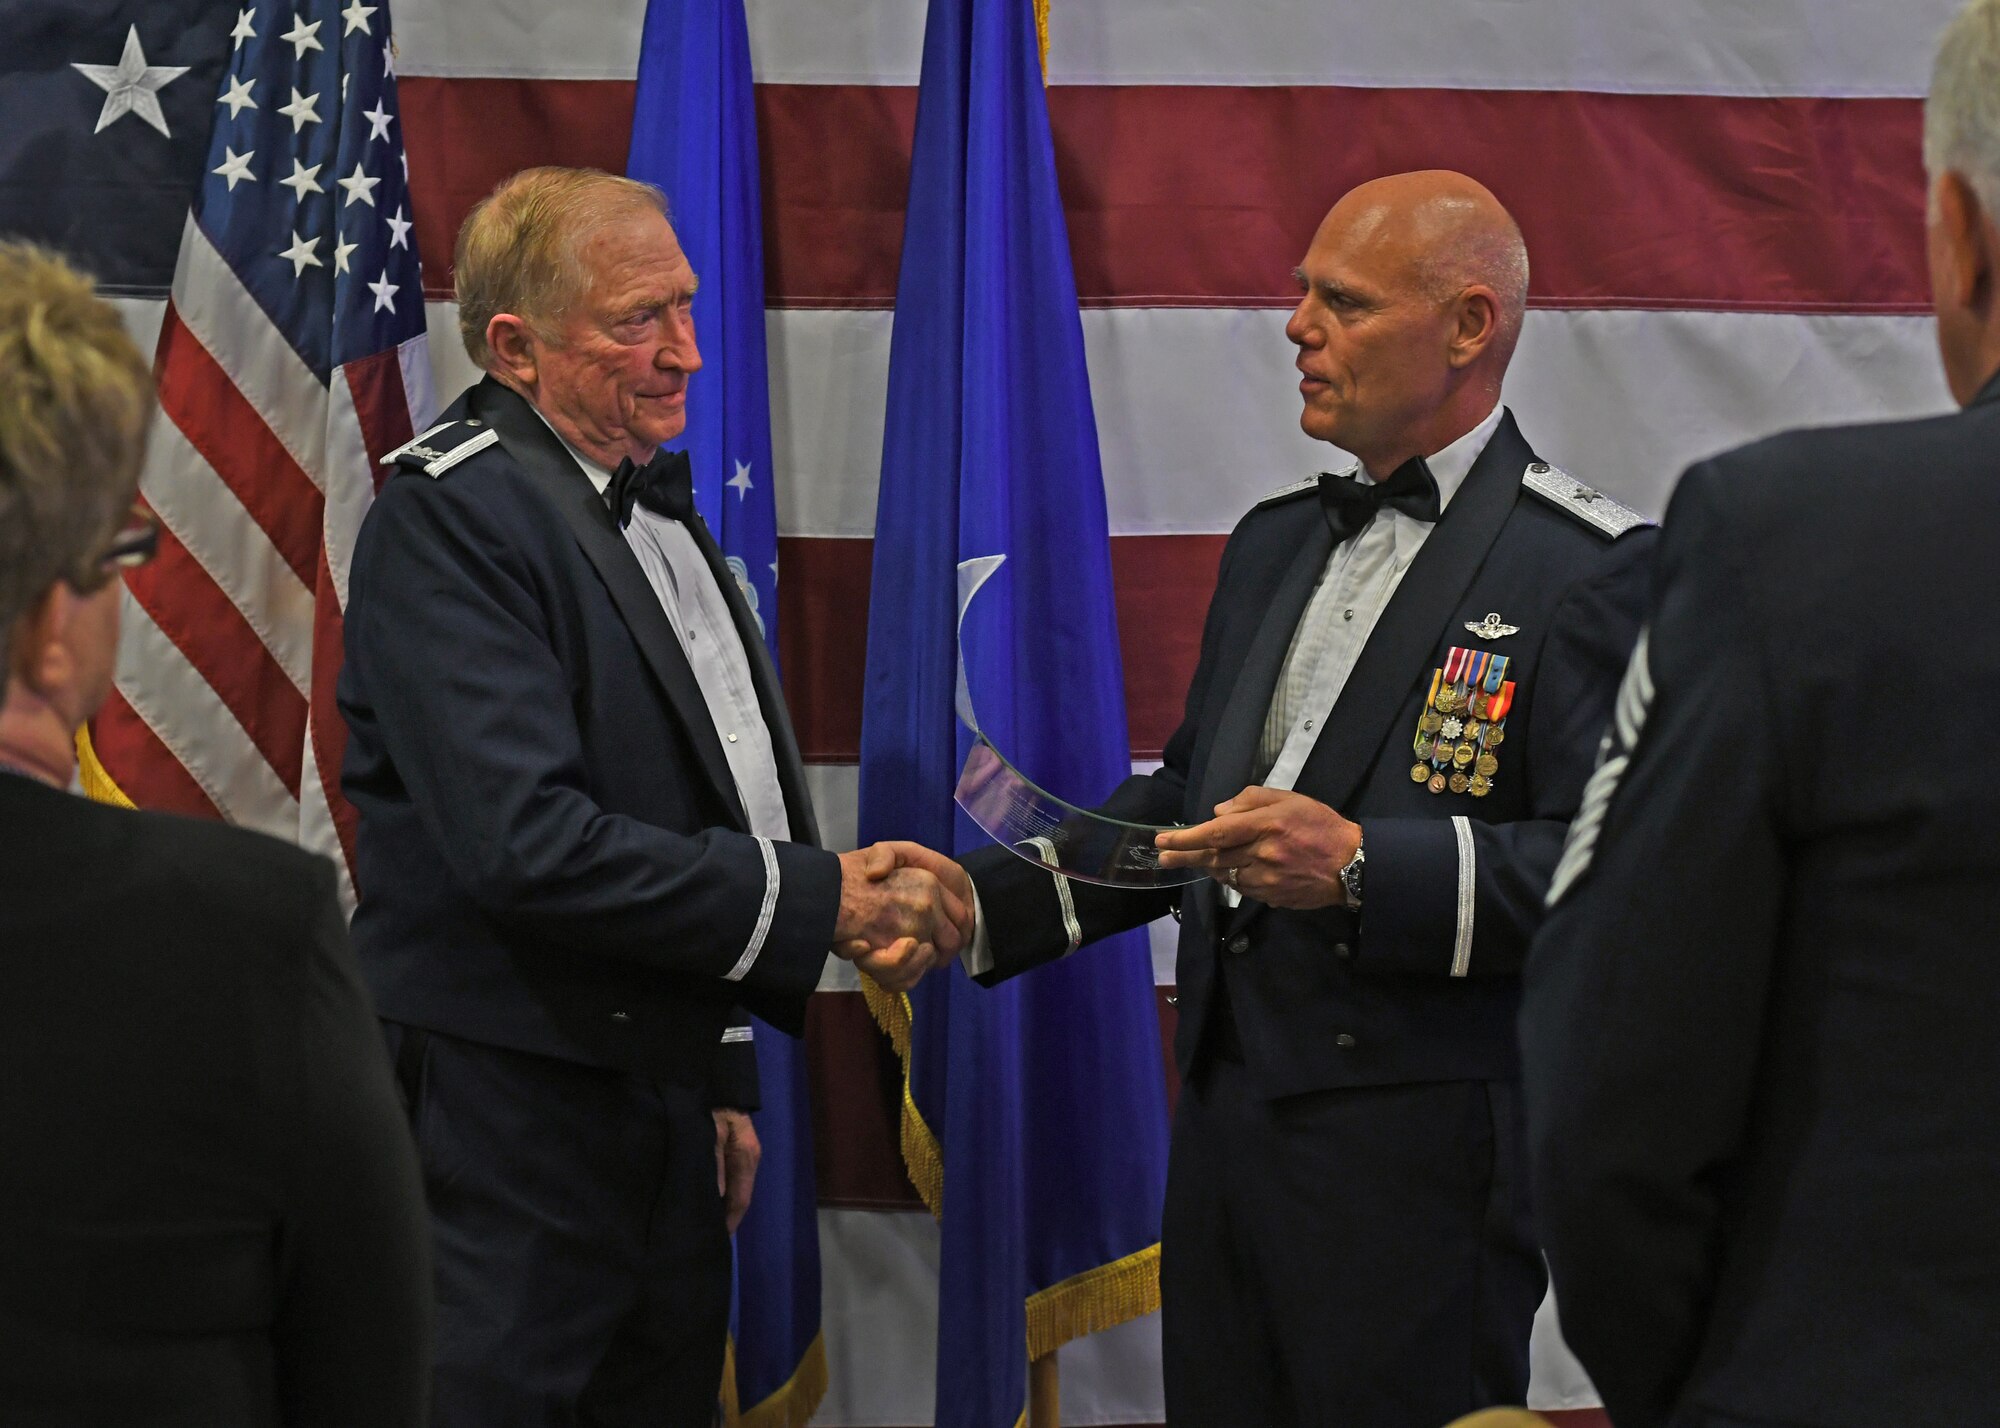 Col. Wayne Waddell, United States Air Force retired, accepts an award of appreciation from Brig. Gen. Richard Kemble, 94th Airlift Wing commander, at Dobbins Air Reserve Base, Ga, Sept. 8, 2018. Waddell was a guest speaker at an Air Force Ball hosted by the 94th AW, and spoke about his time as a prisoner of war in Vietnam. (U.S. Air Force Photo by Staff Sgt. Miles Wilson)